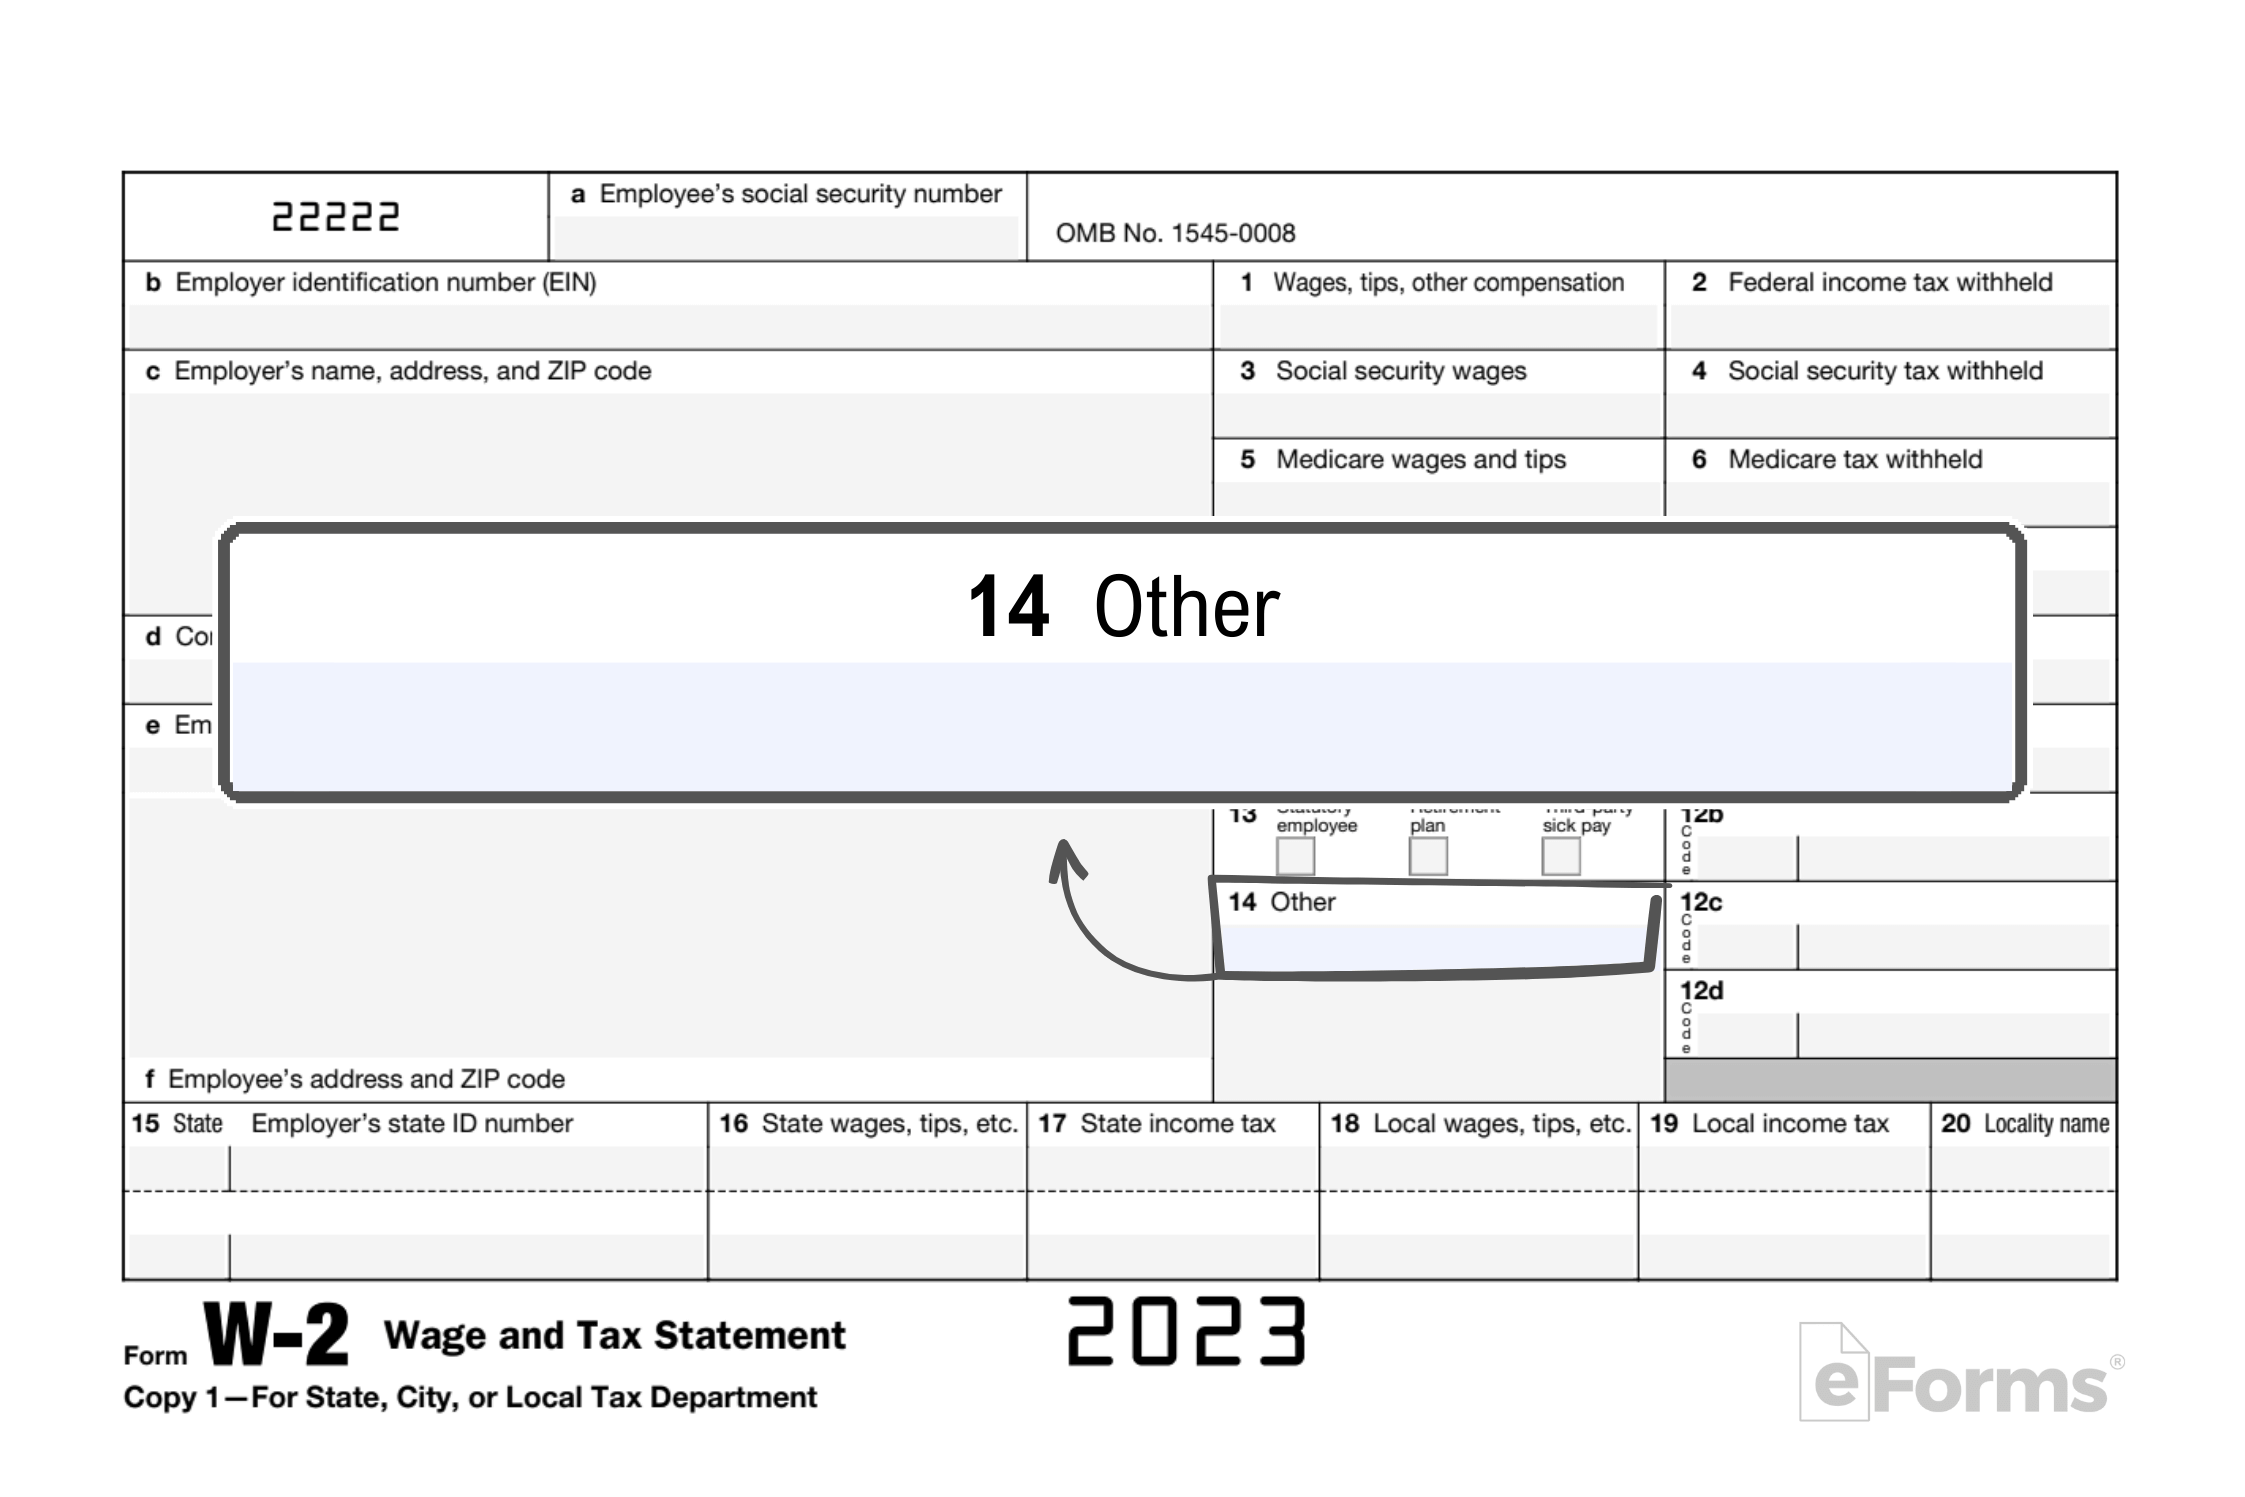 Free Irs Form W-2 | Wage And Tax Statement - Pdf – Eforms intended for 2023 W2 Form Pdf